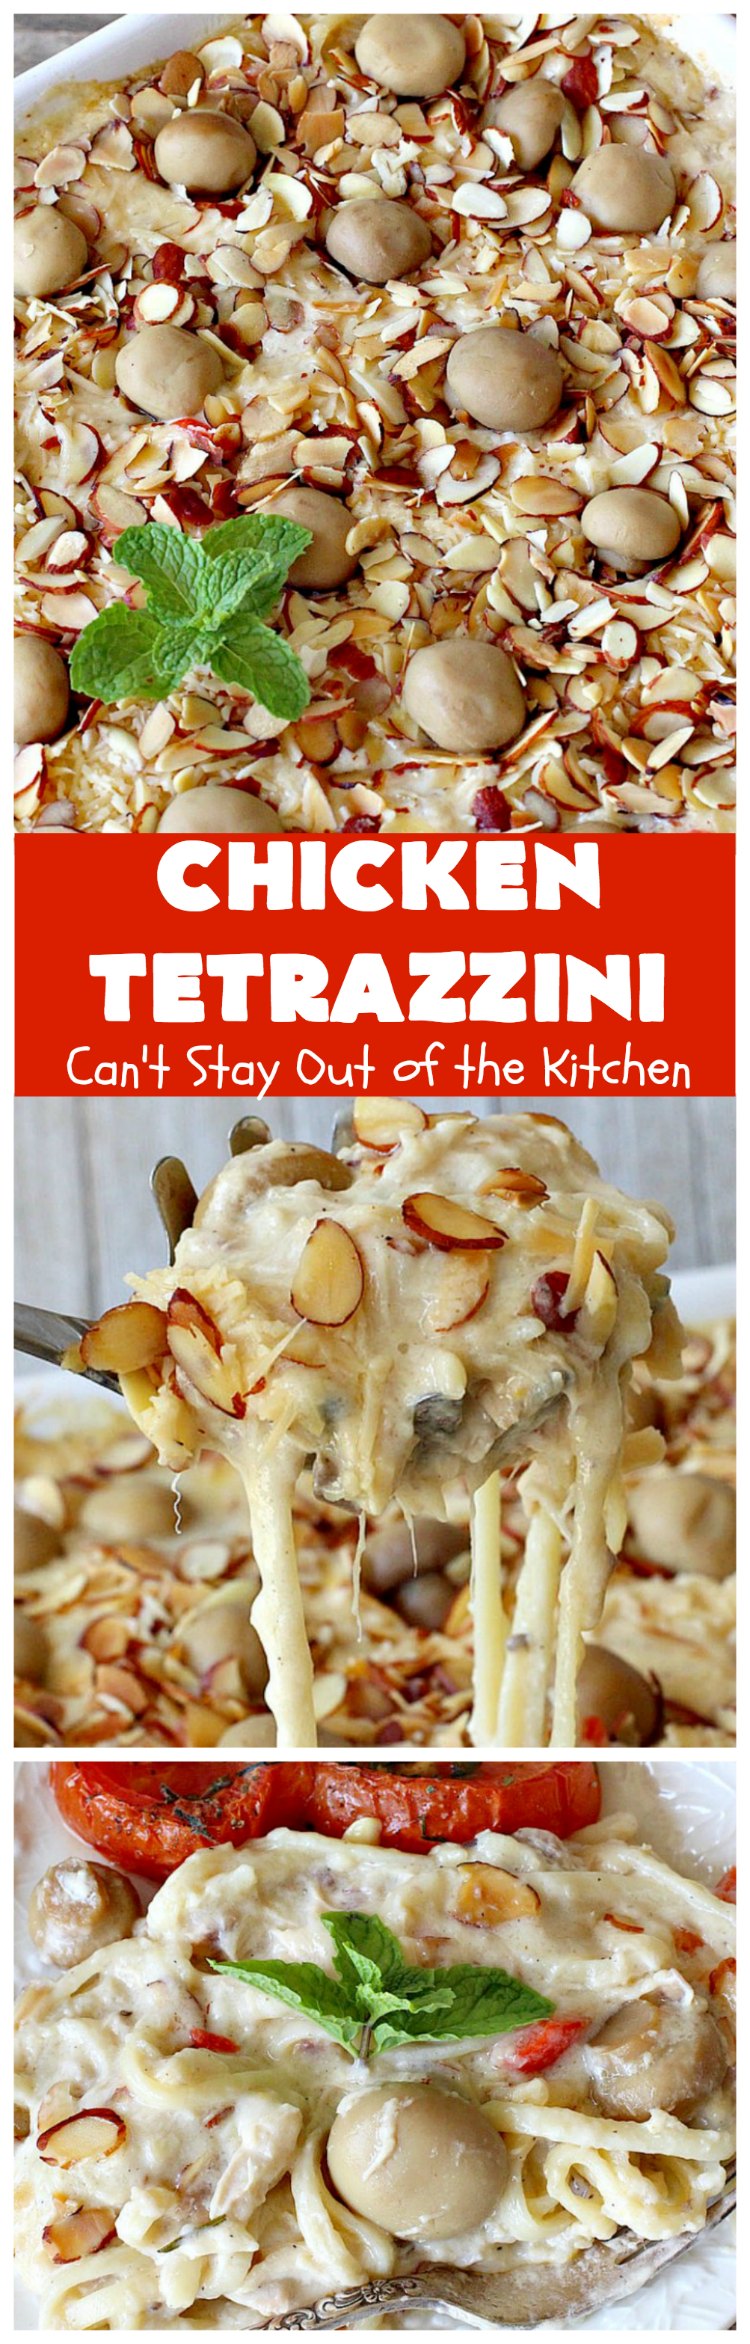 Chicken Tetrazzini | Can't Stay Out of the Kitchen